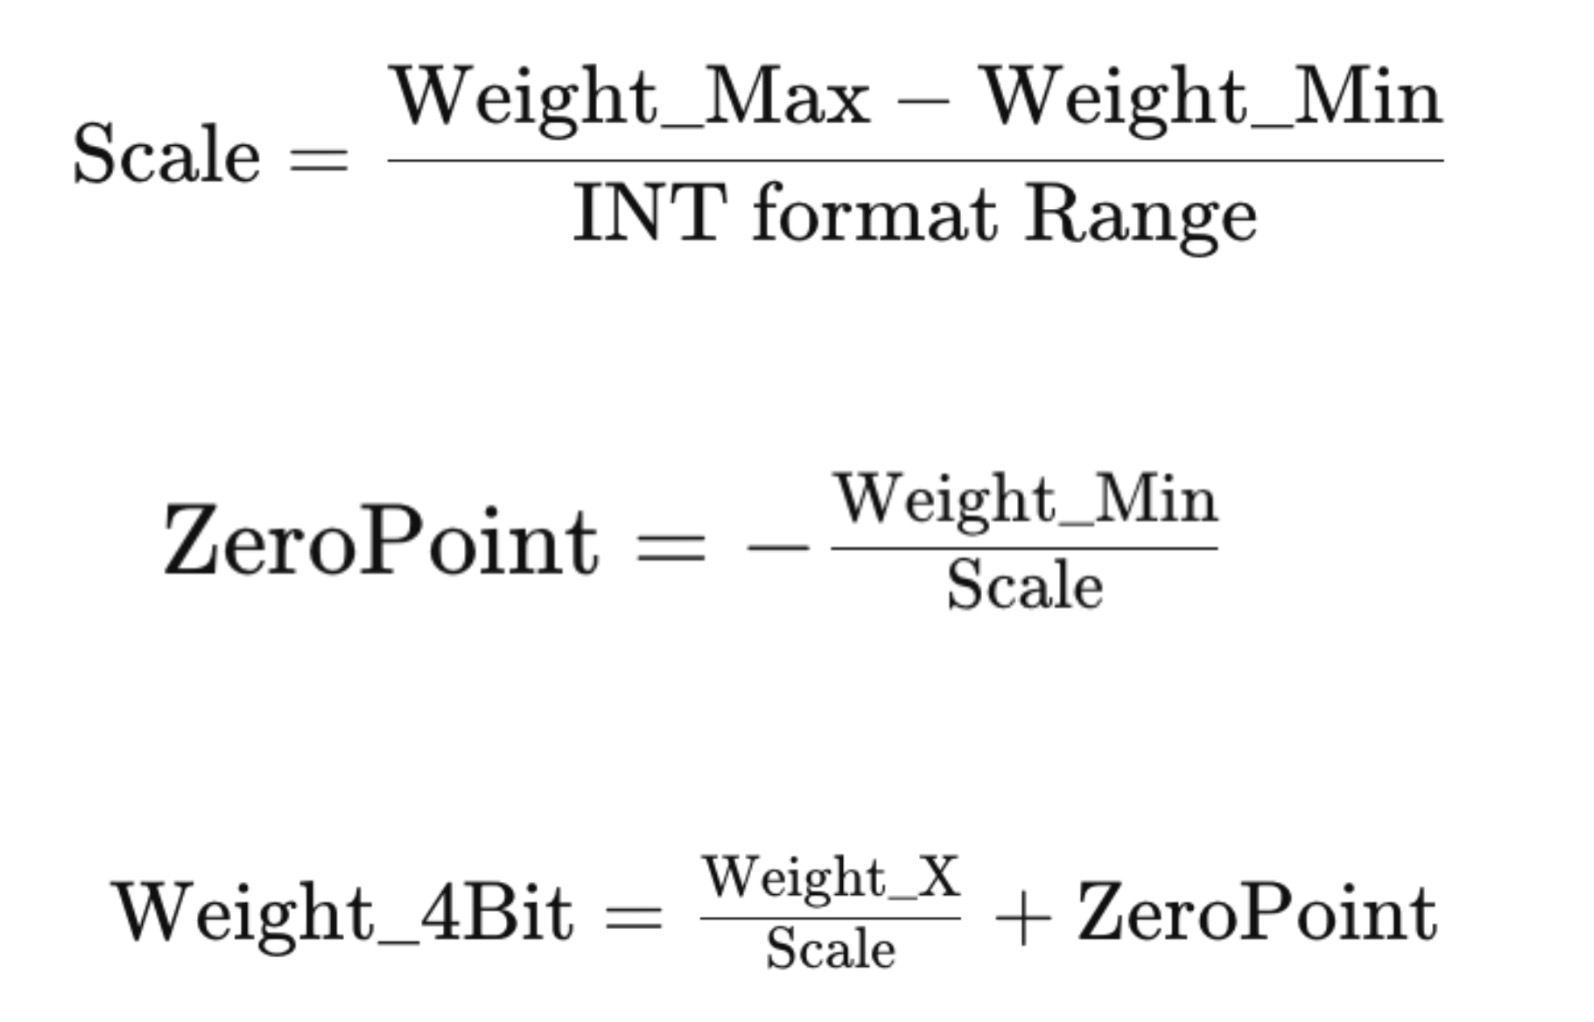 The basic process for INT quantization